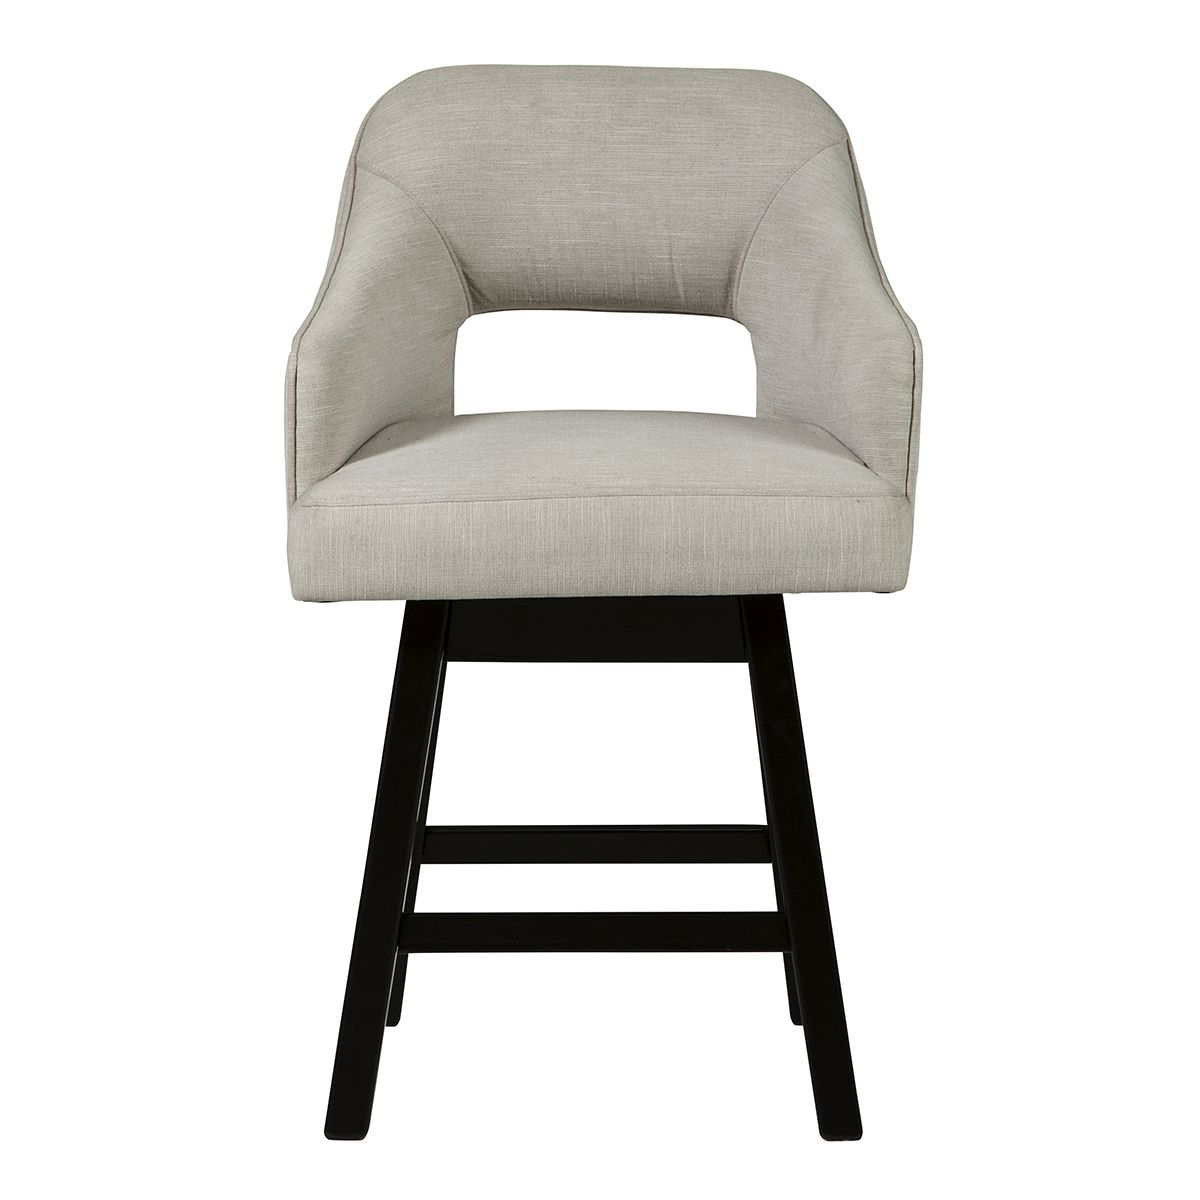 Picture of TALLEY COUNTER STOOL